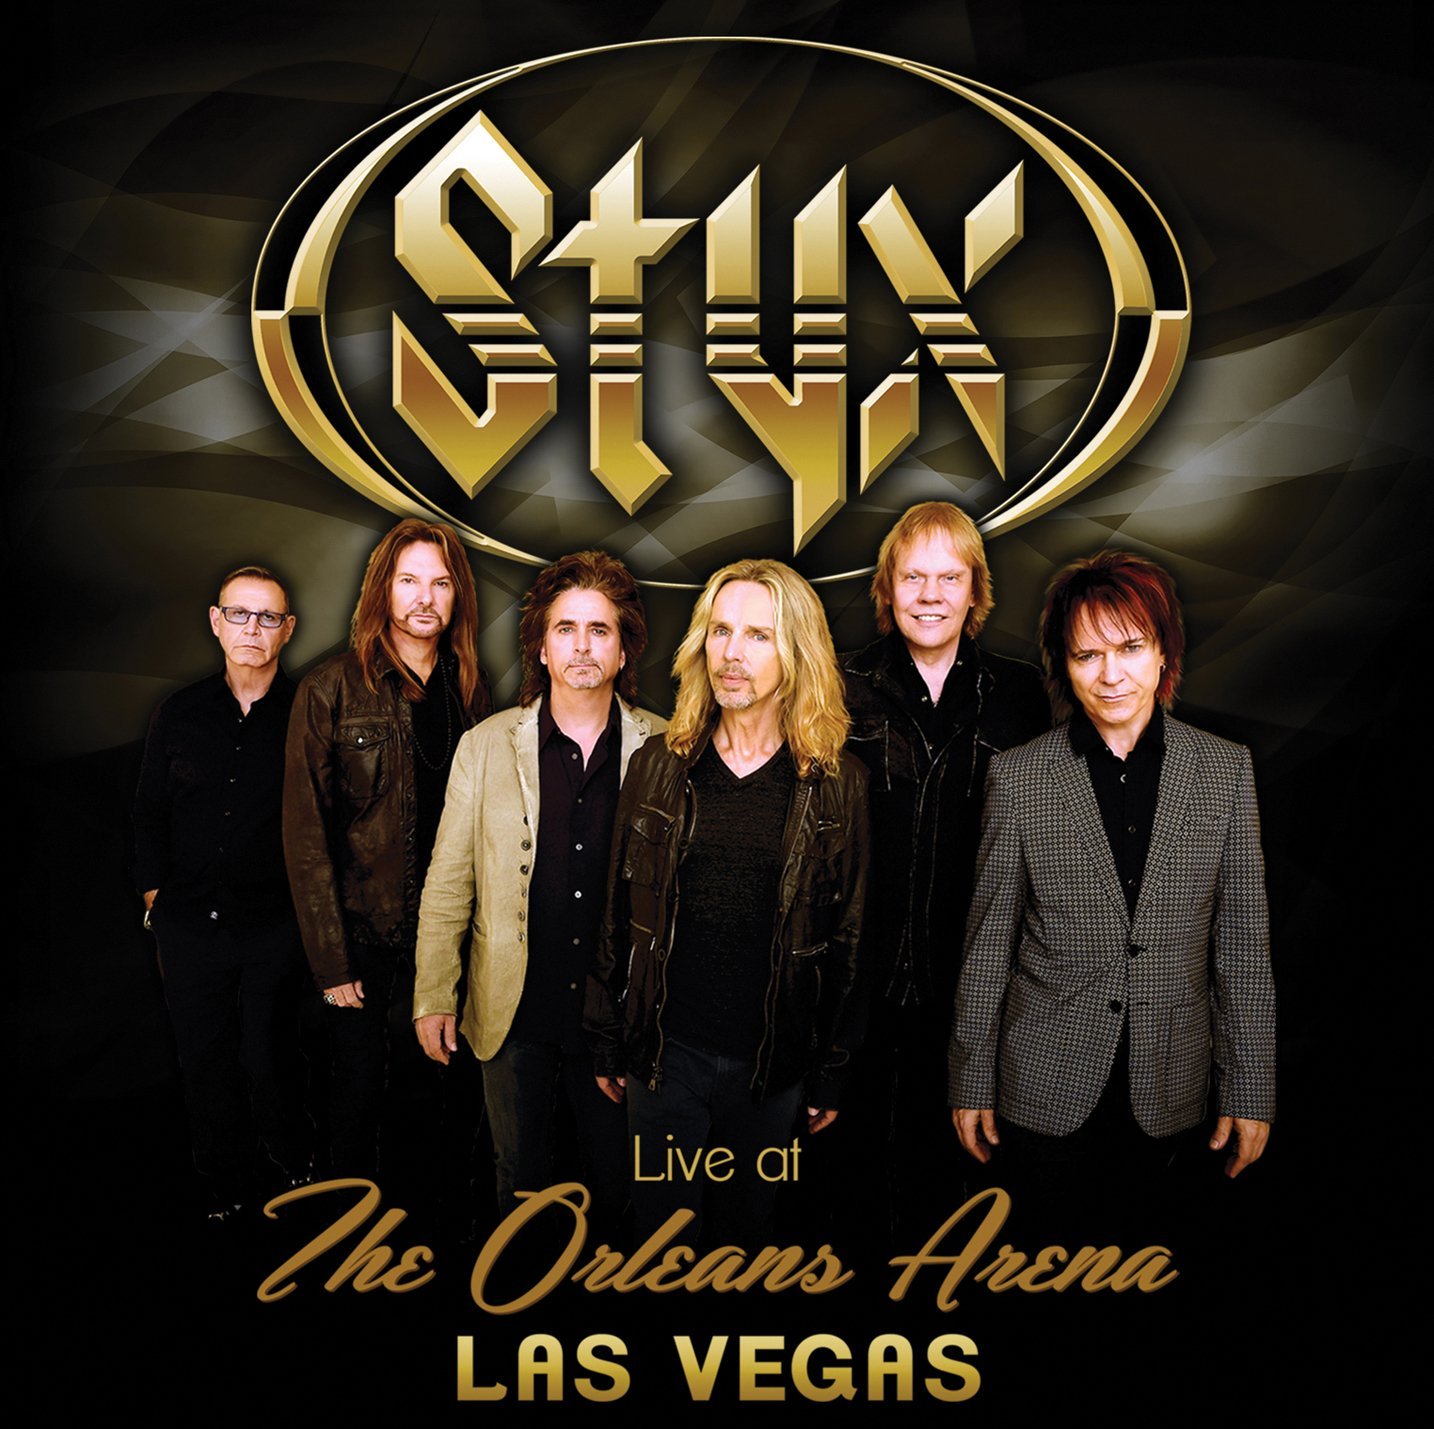 styx-live-at-the-orleans-arena